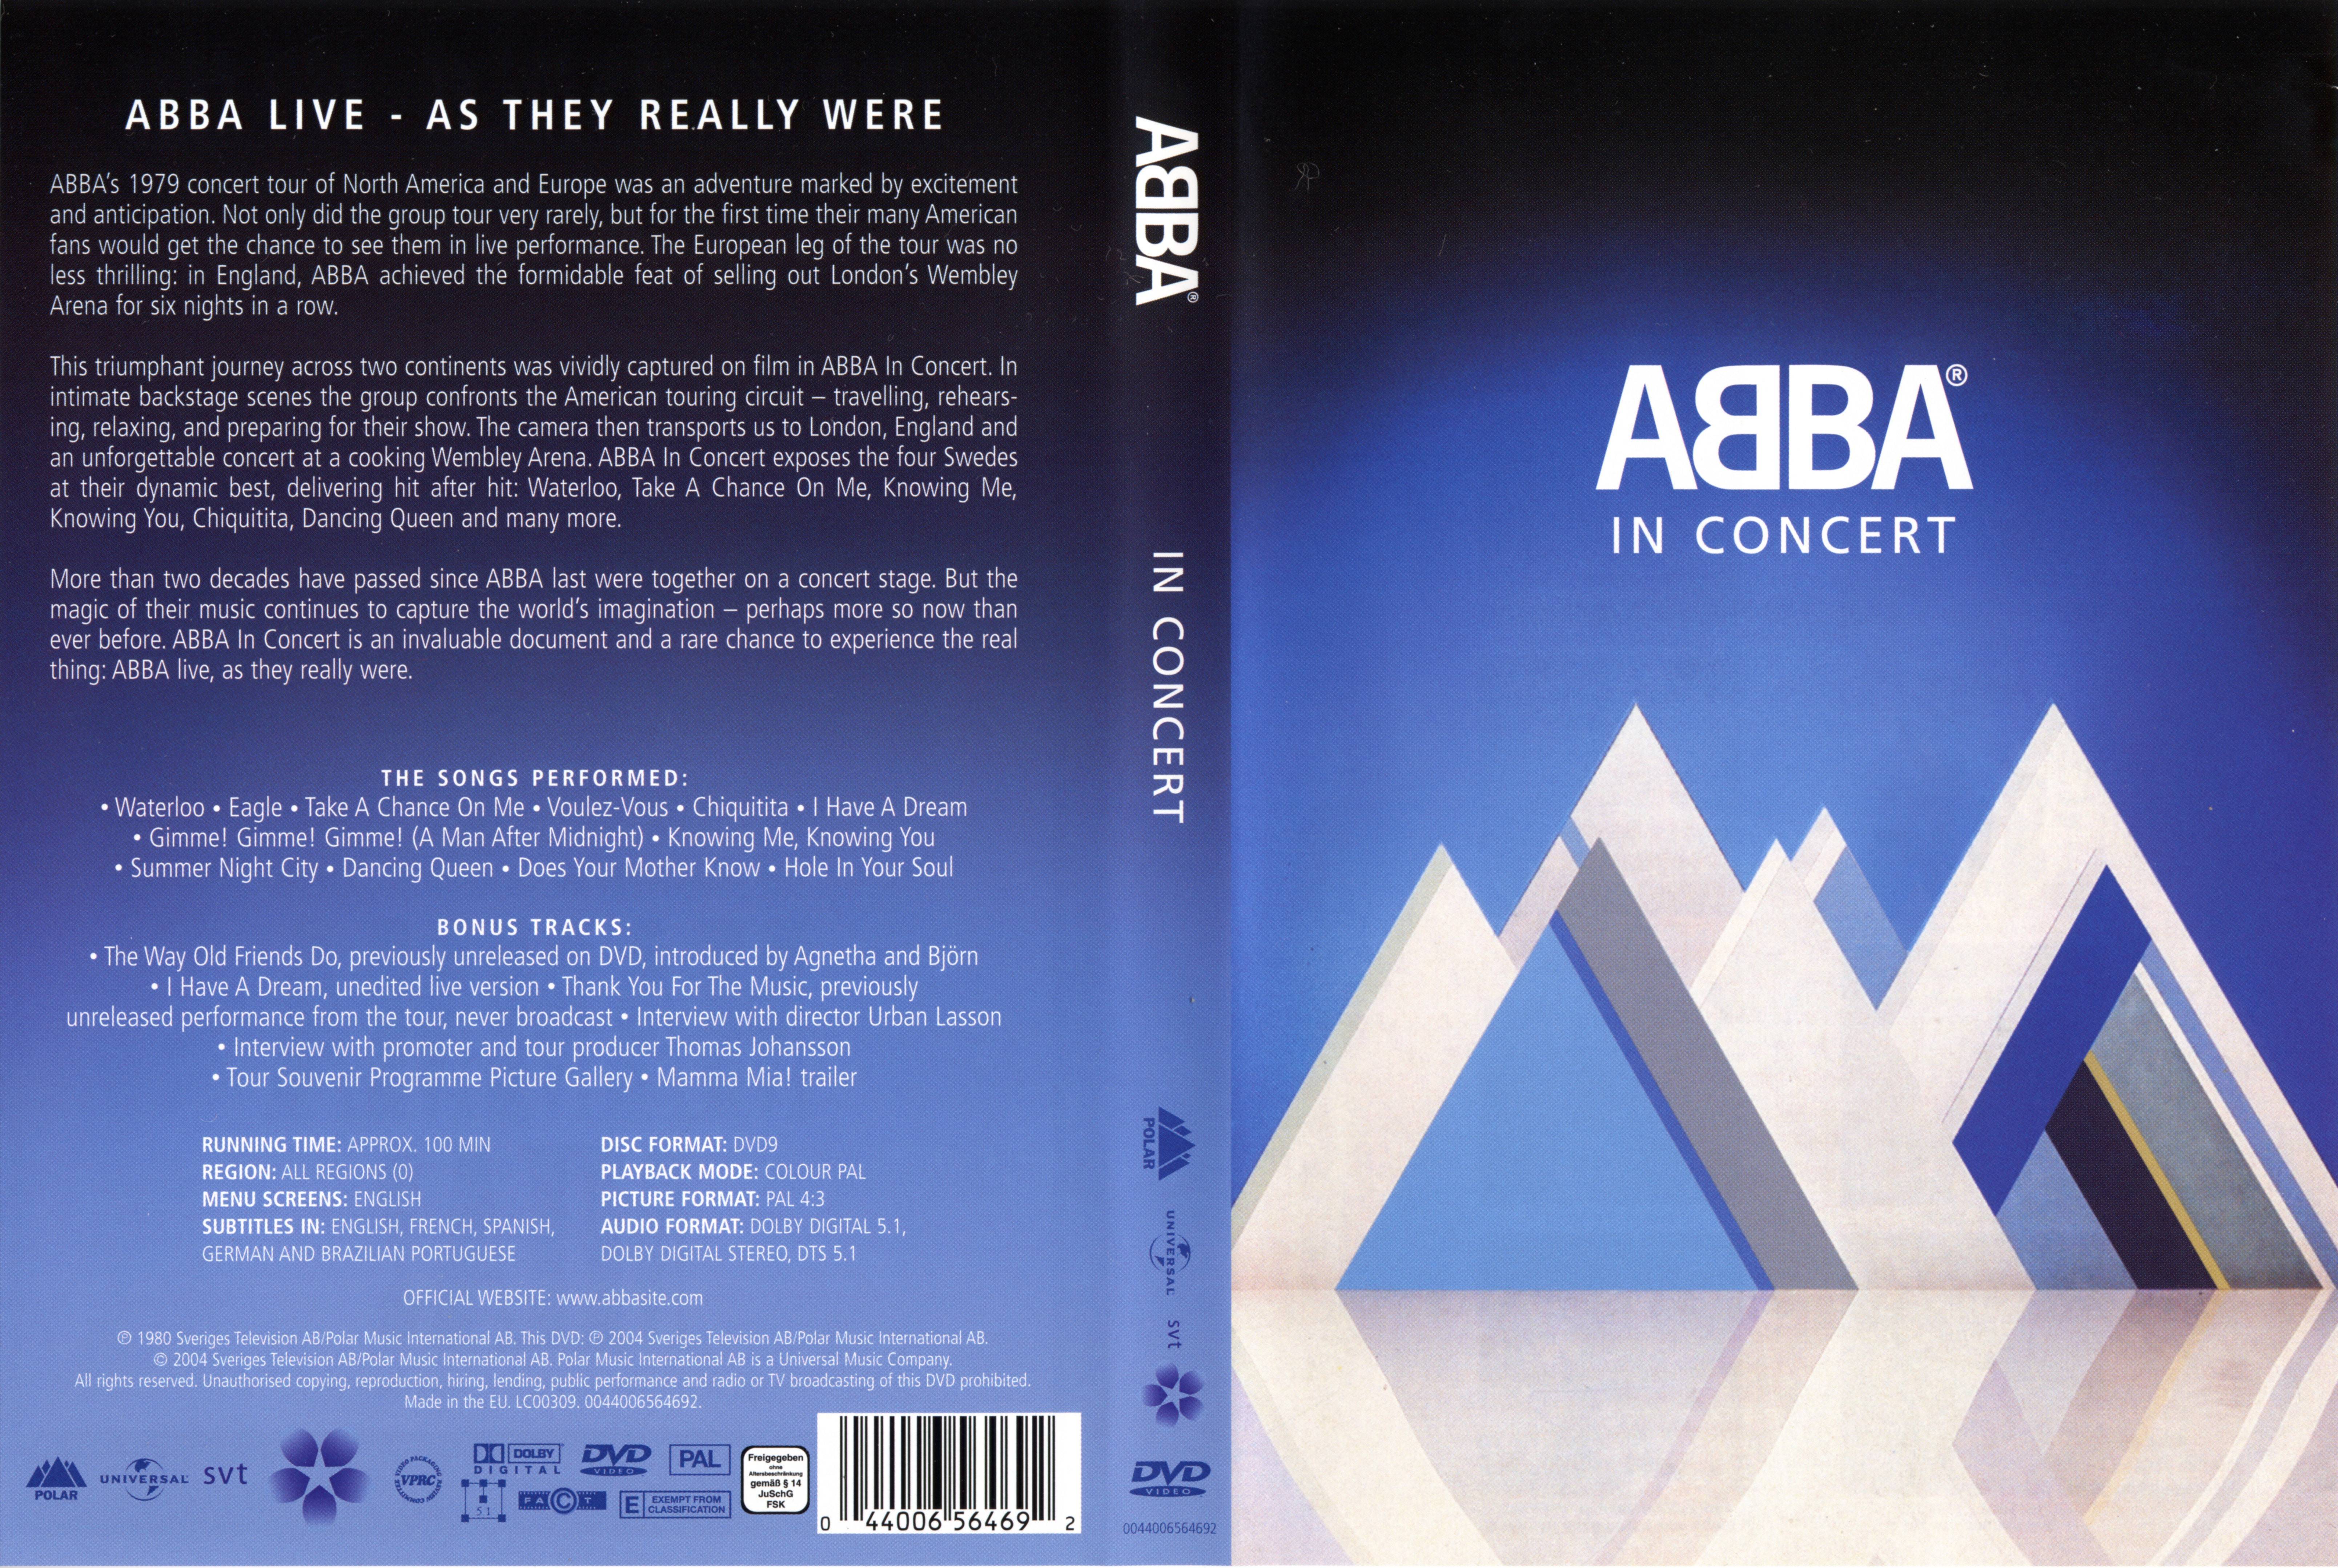 Jaquette DVD ABBA in concert